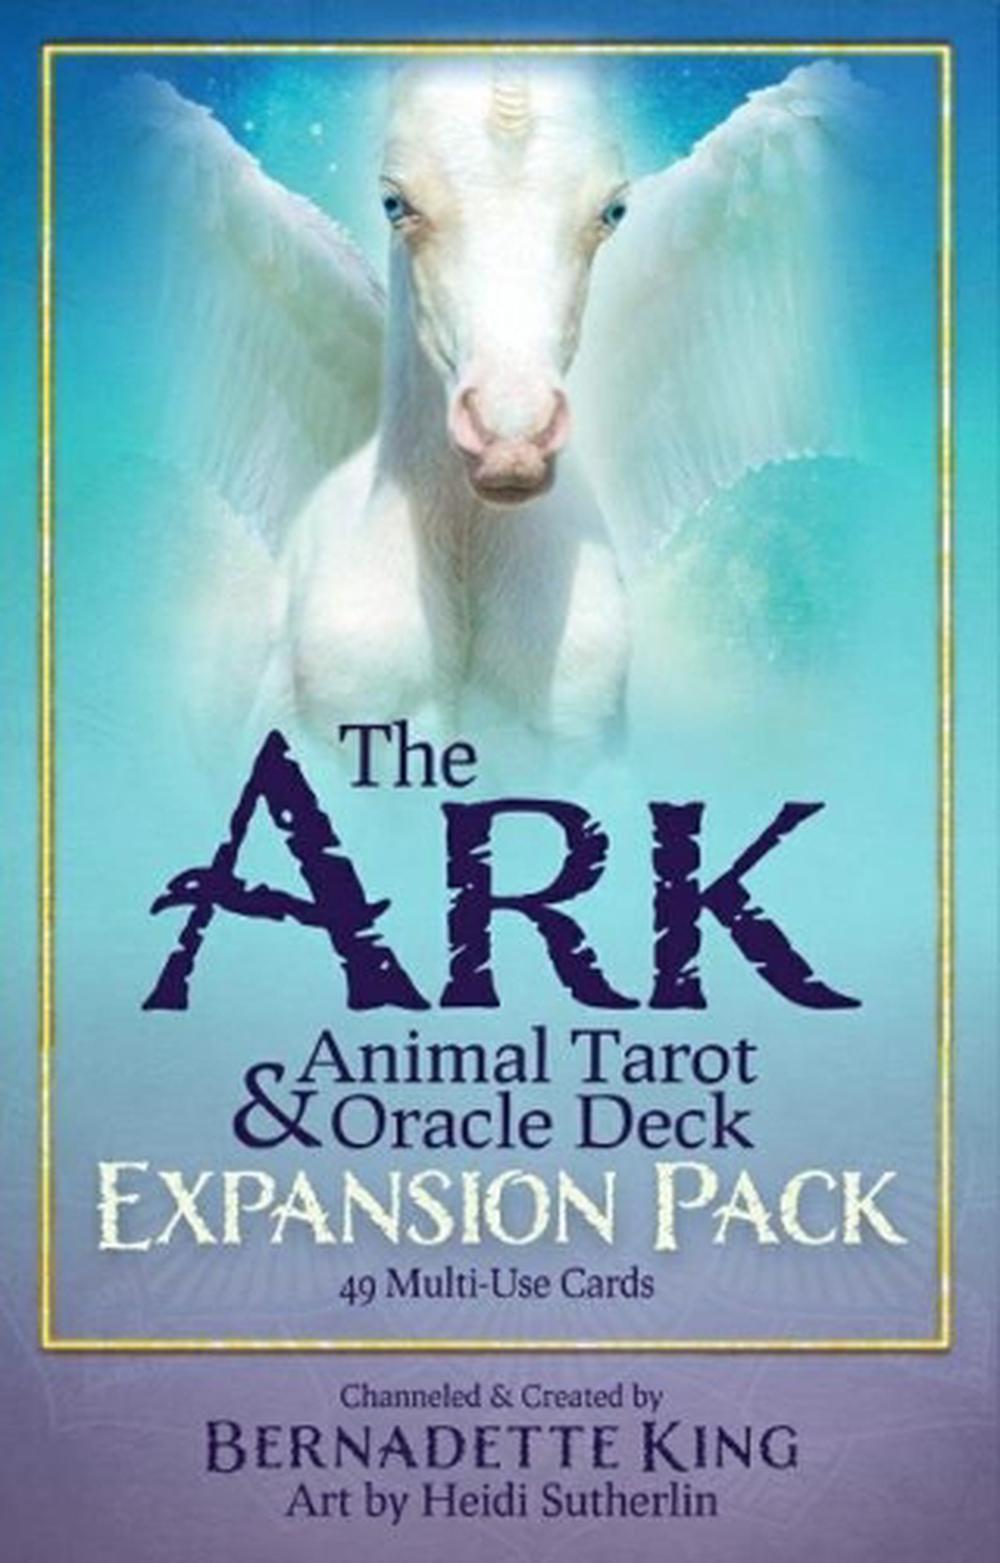 Ark Animal Tarot & Oracle Deck - Expansion Pack by Bernadette King,  9781948368414 | Buy online at The Nile